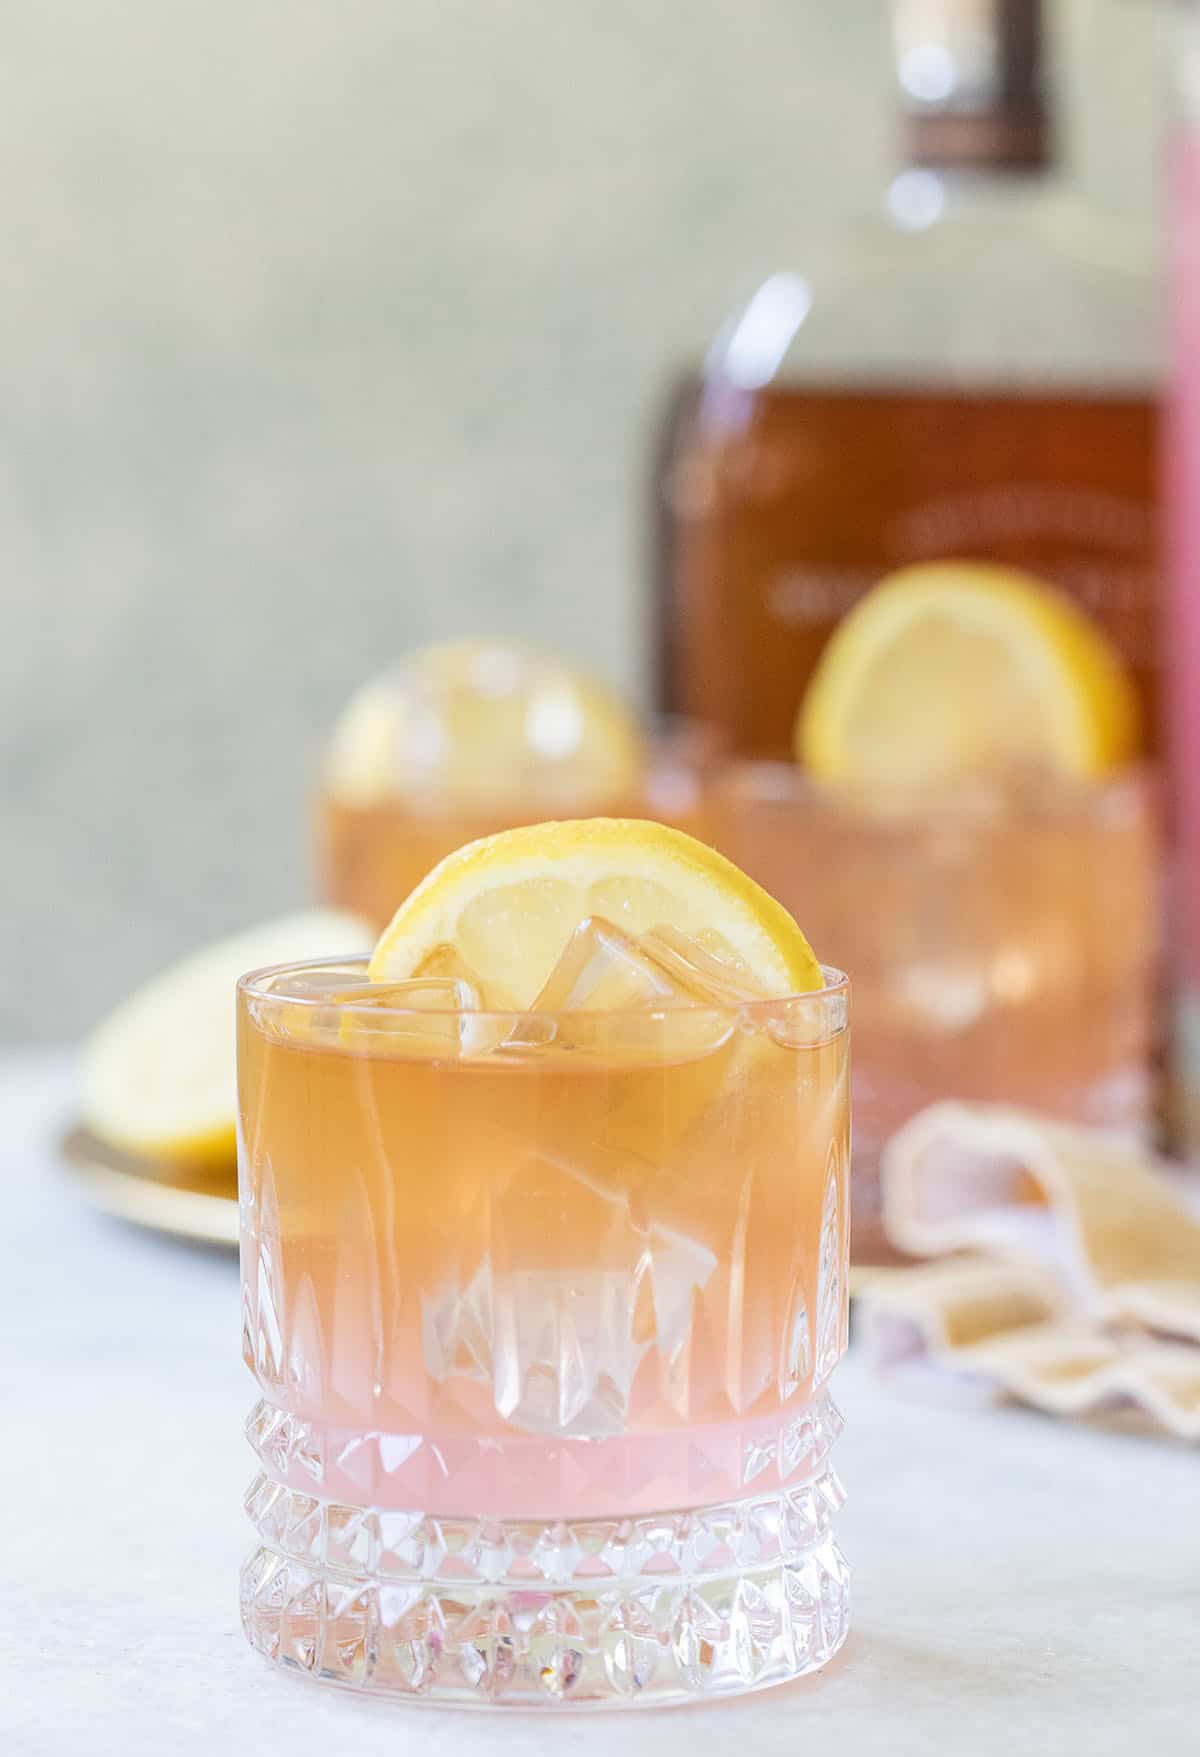 Whiskey lemonade made with pink lemonade and garnished with a lemon wheel.